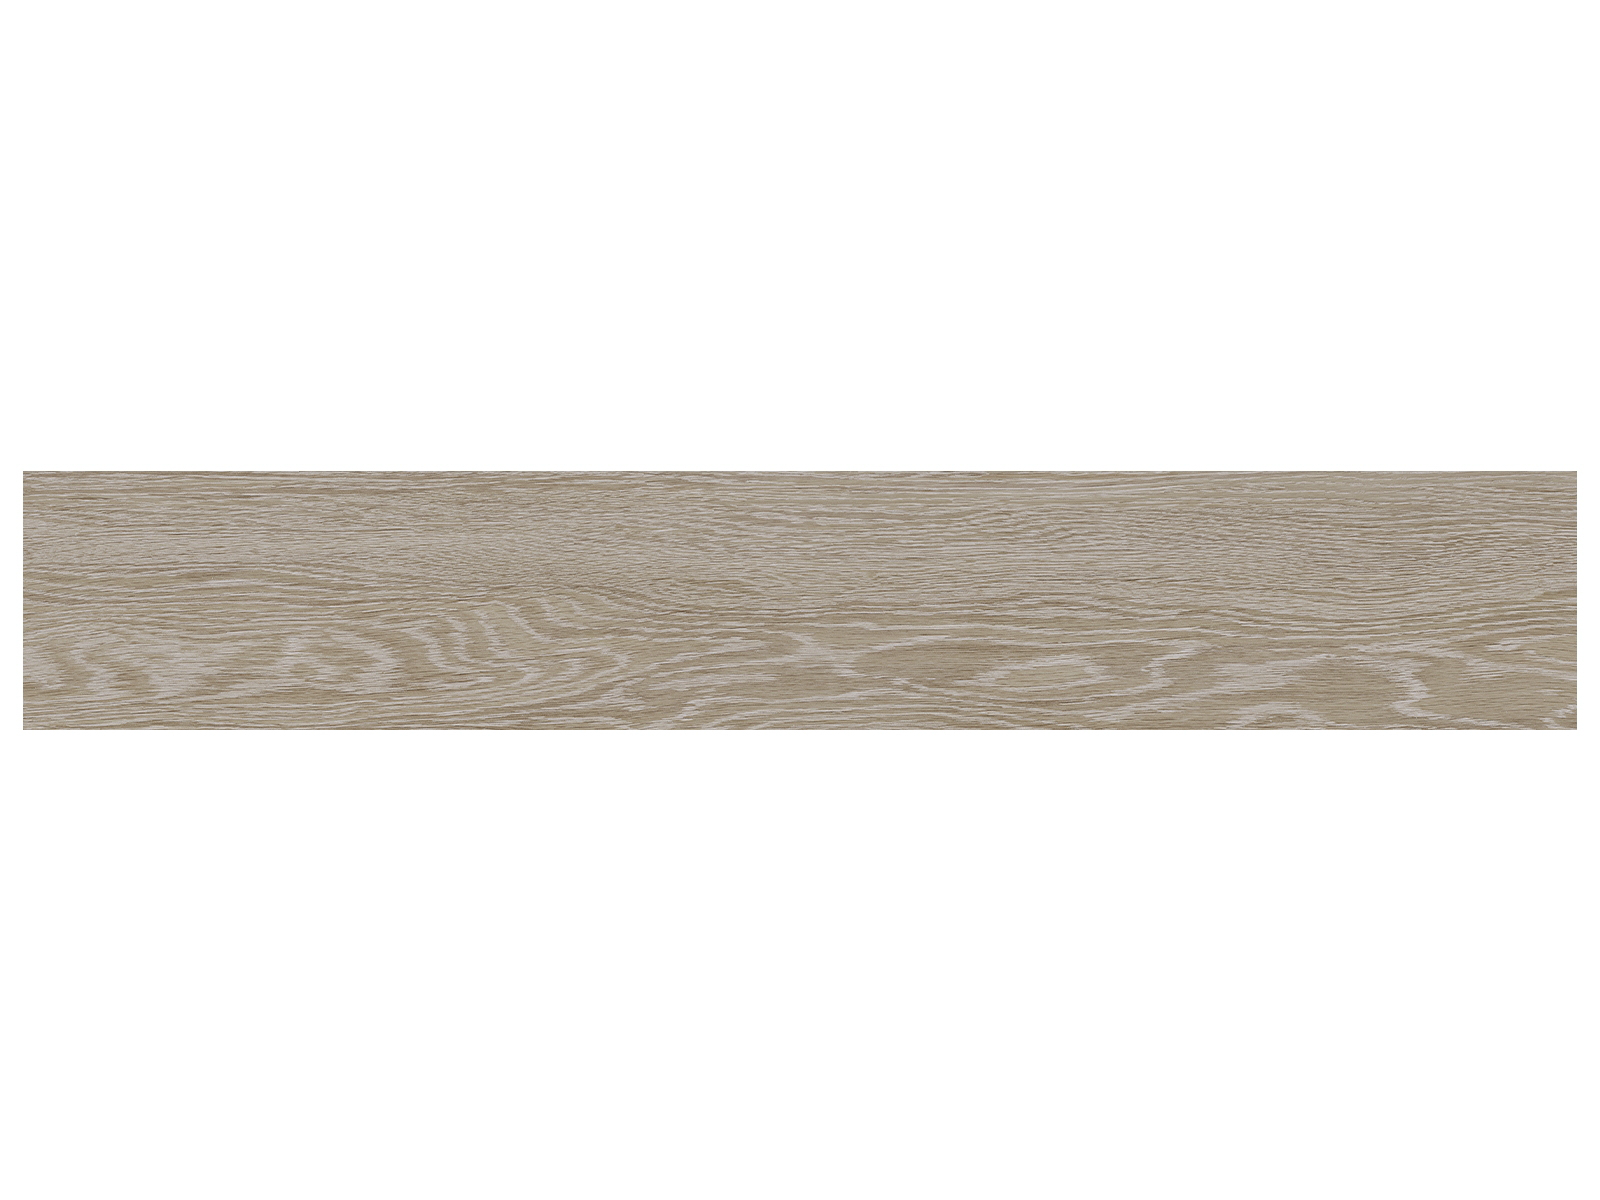 french oak pattern glazed porcelain field tile from aspen anatolia collection distributed by surface group international matte finish rectified edge 6x36 rectangle shape